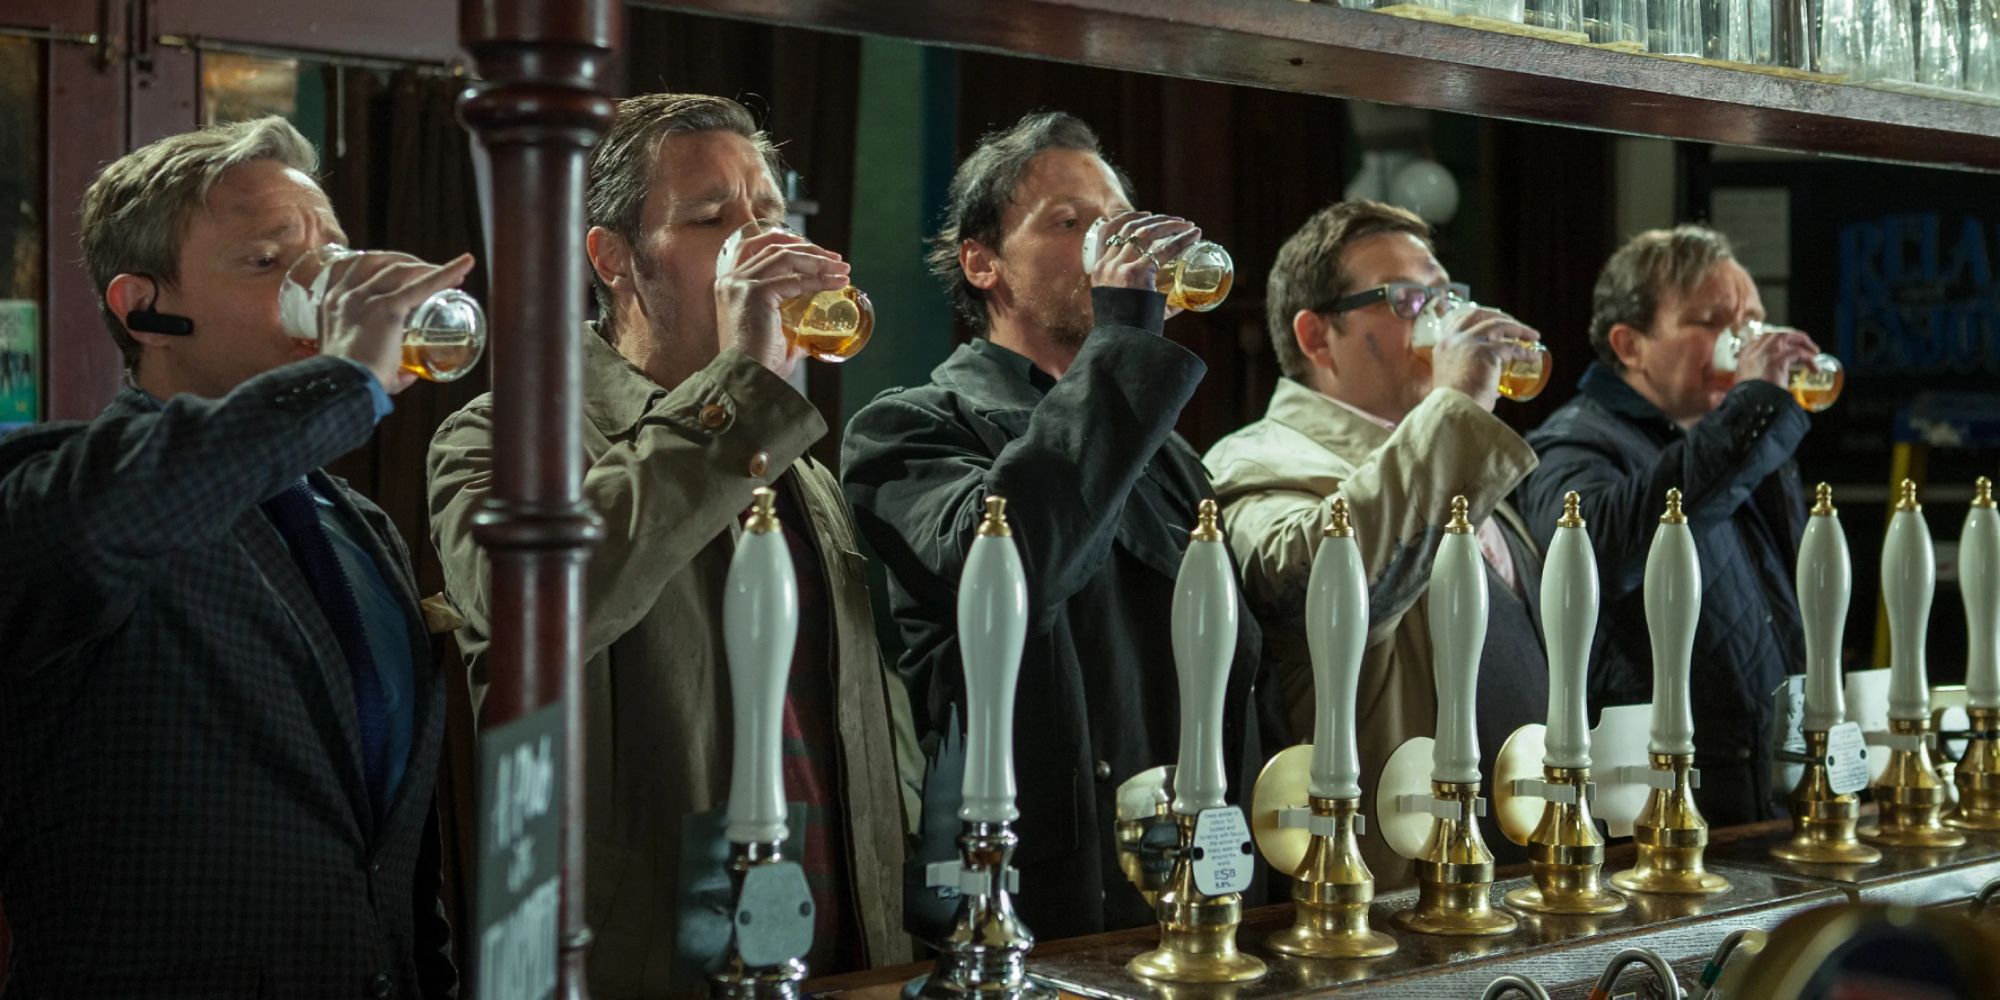 Five men drinking in sync at The World's End bar.